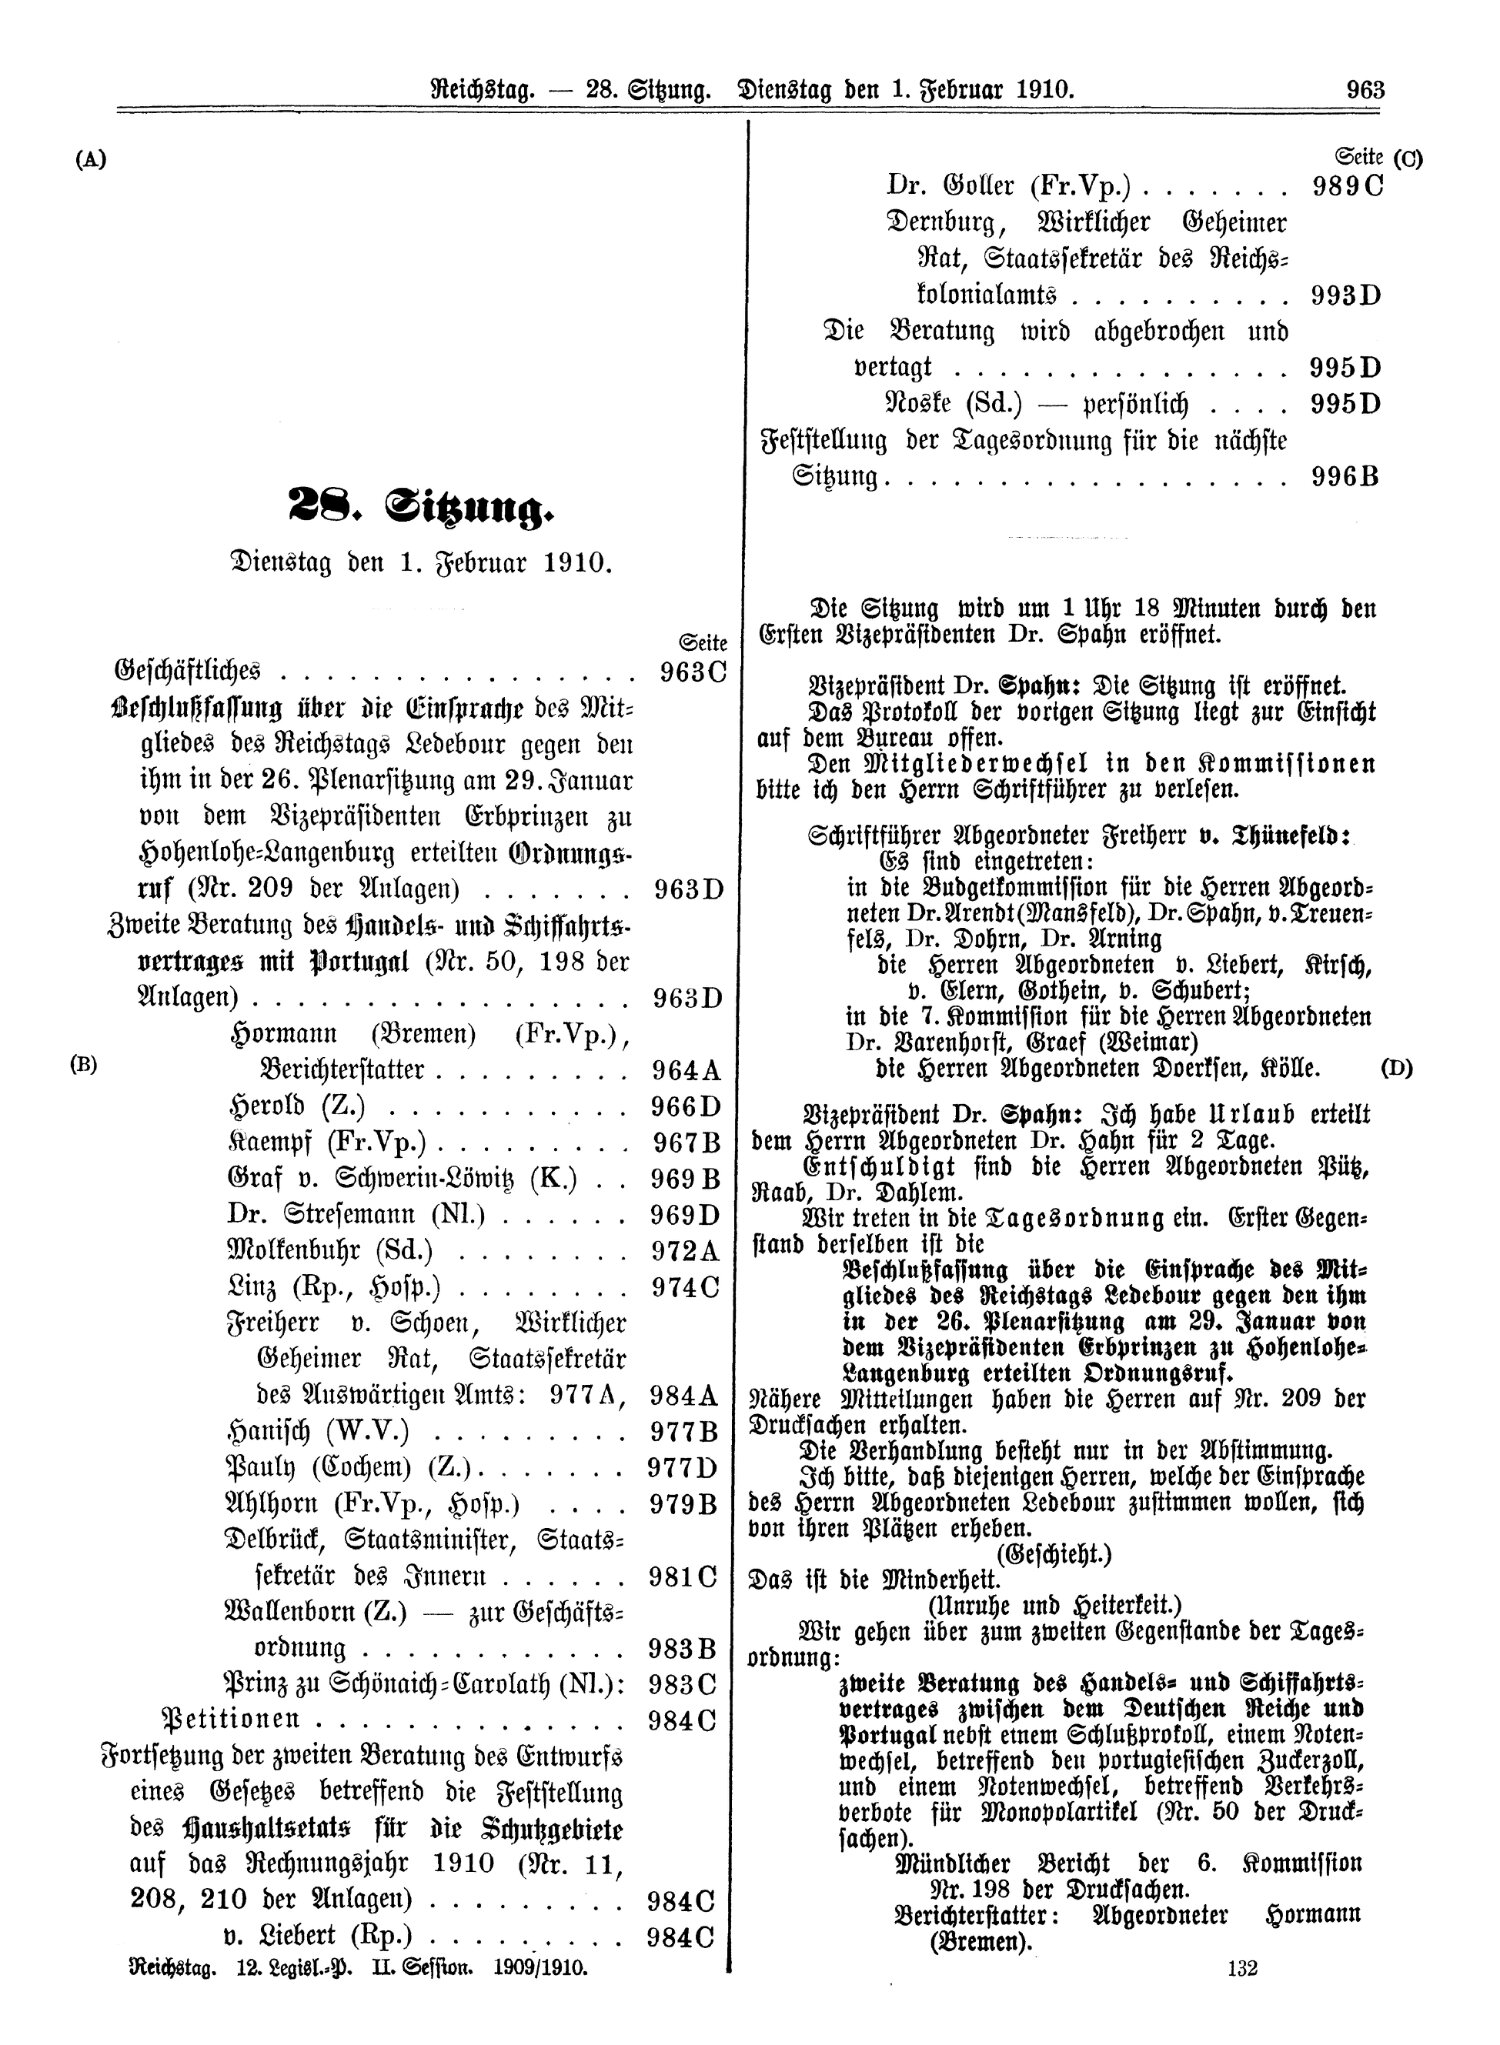 Scan of page 963